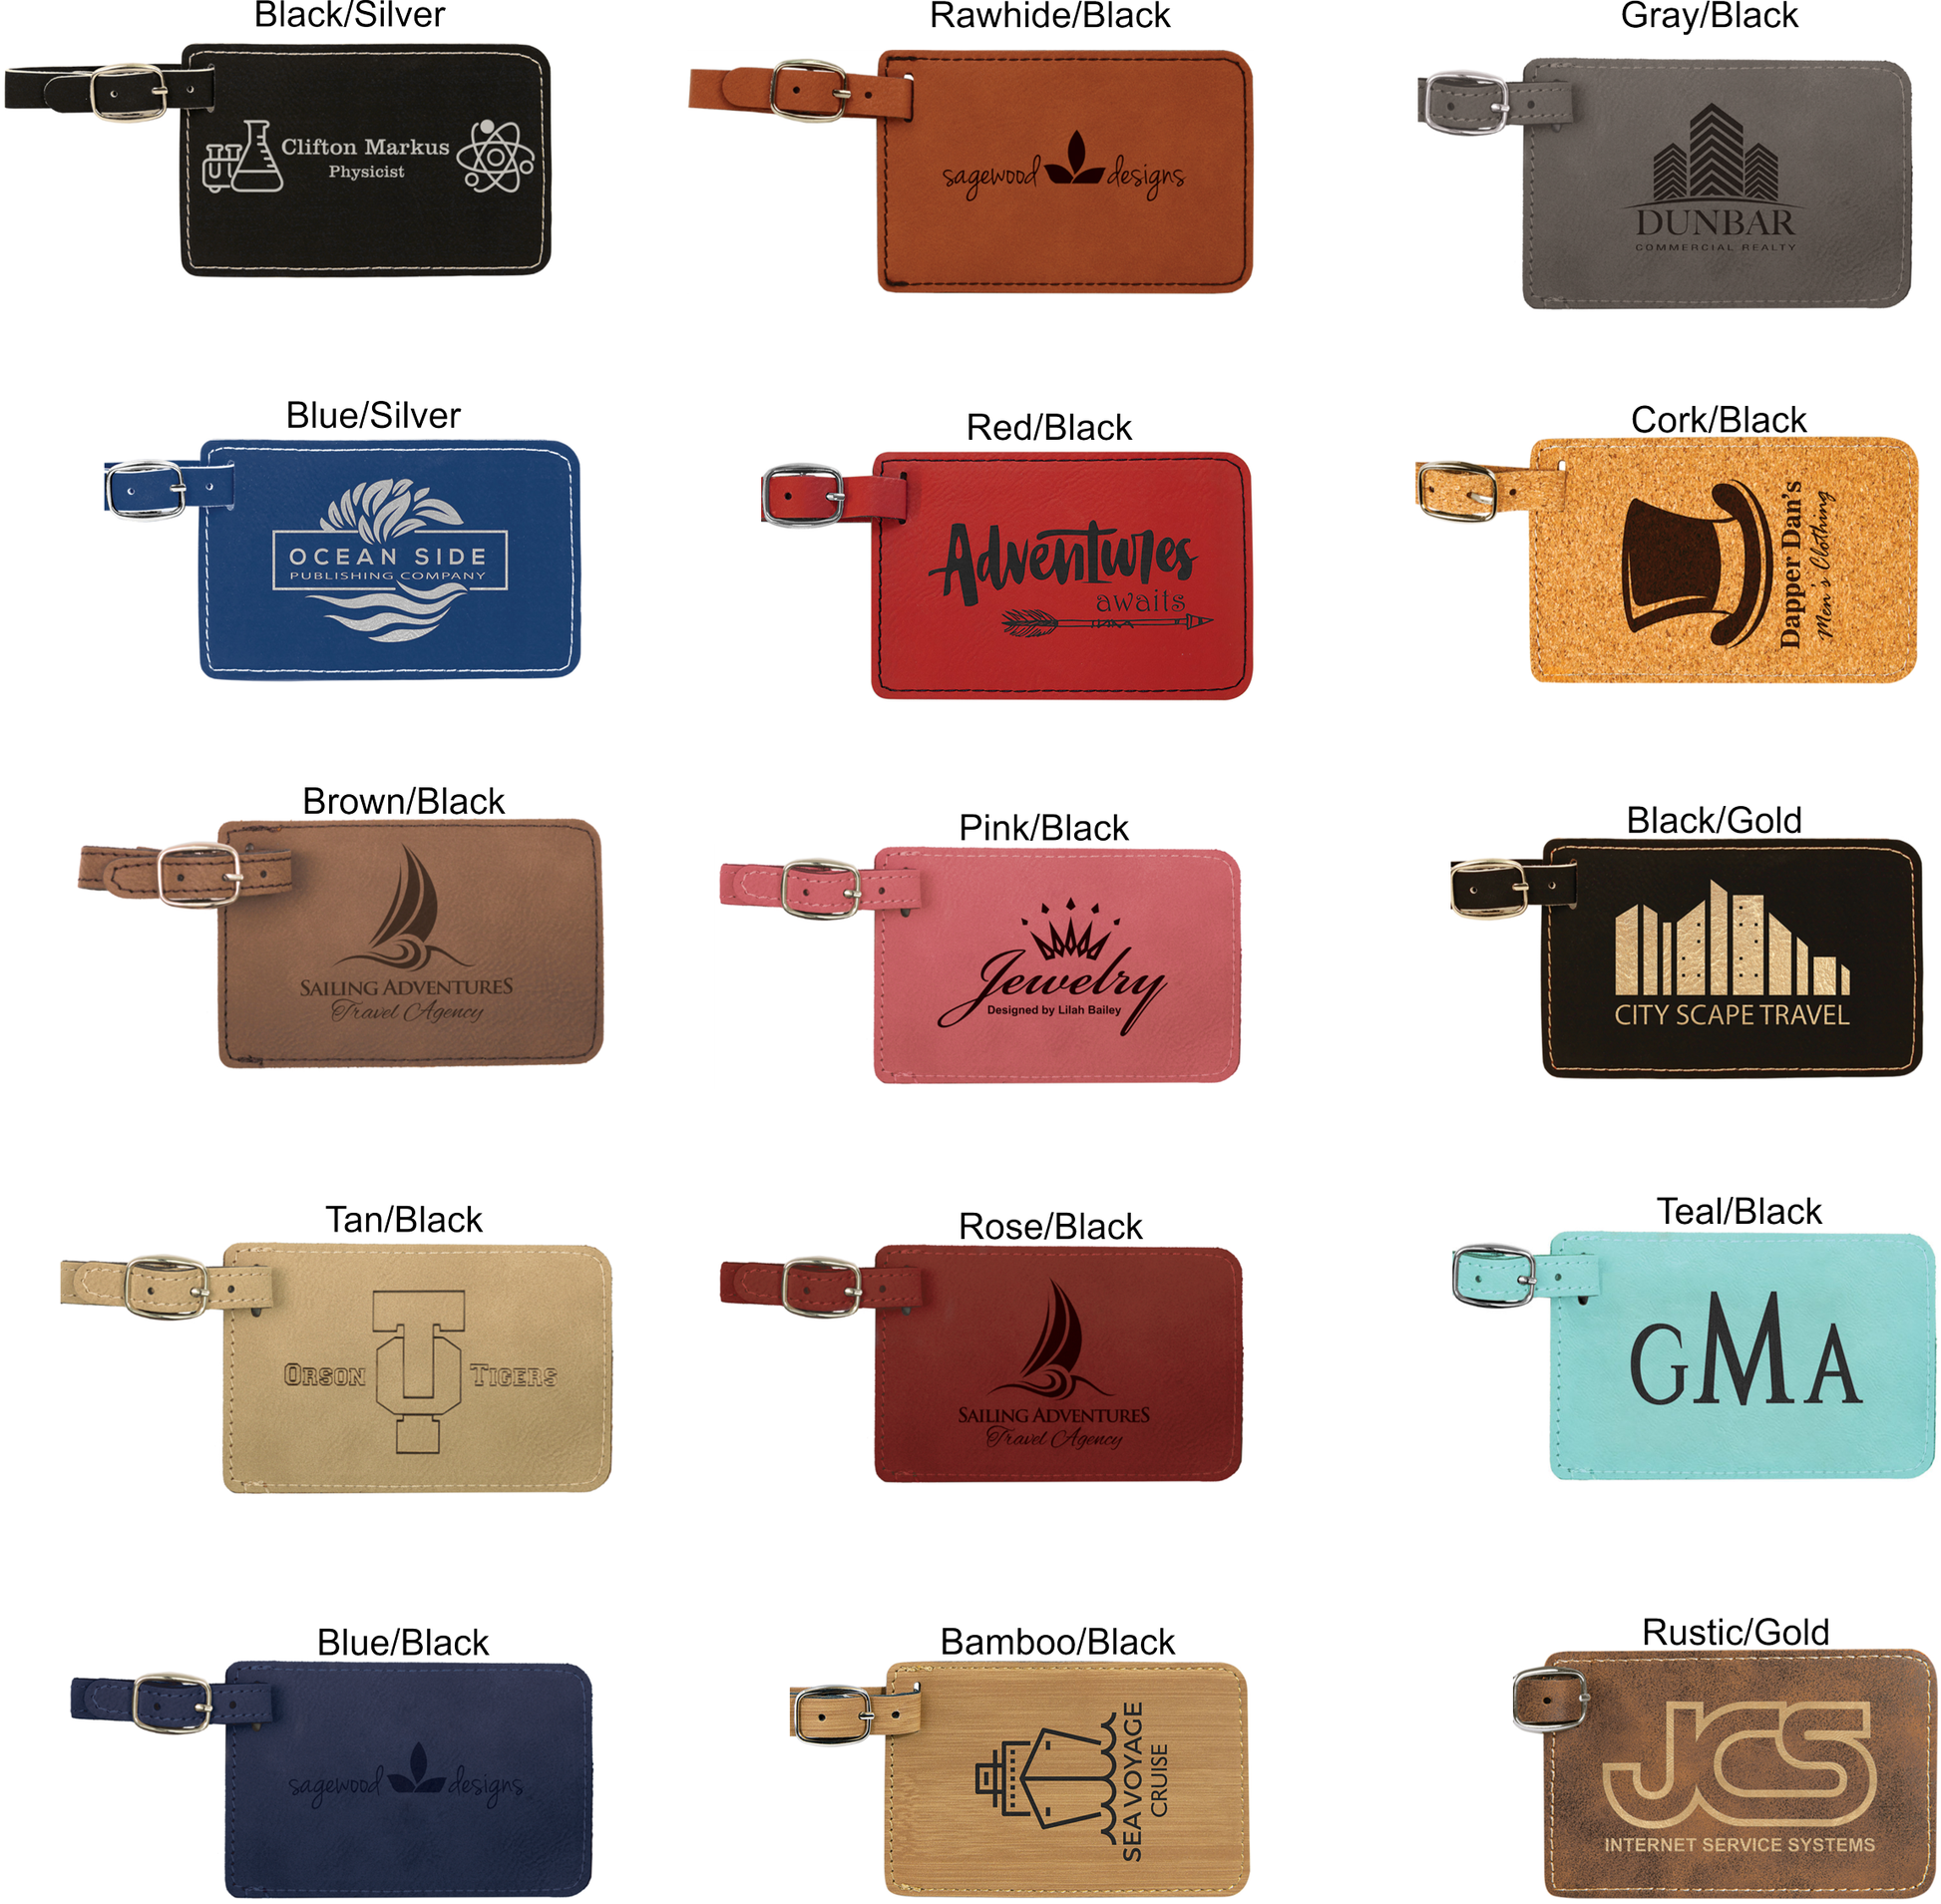 Engravable Luggage ID Tag, Natural Leather